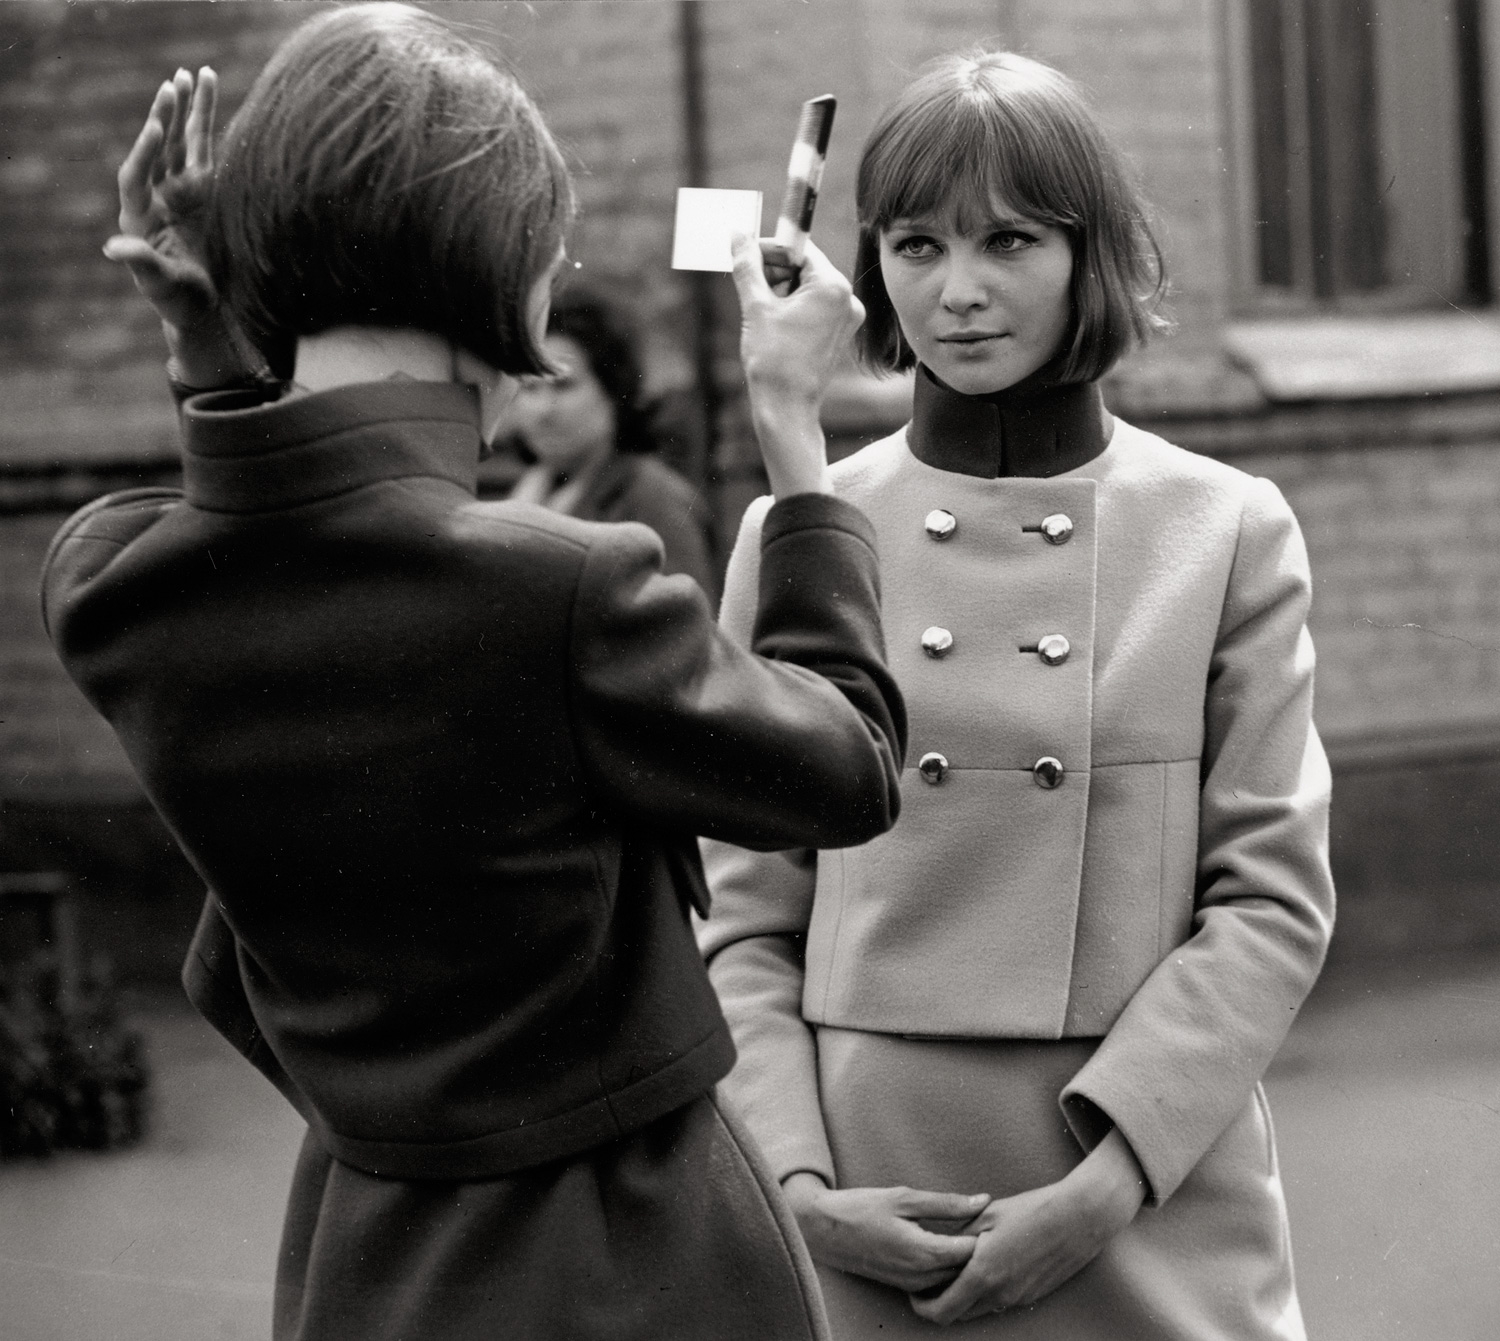 Fashion photos, Moscow by Arno Fischer, 1967